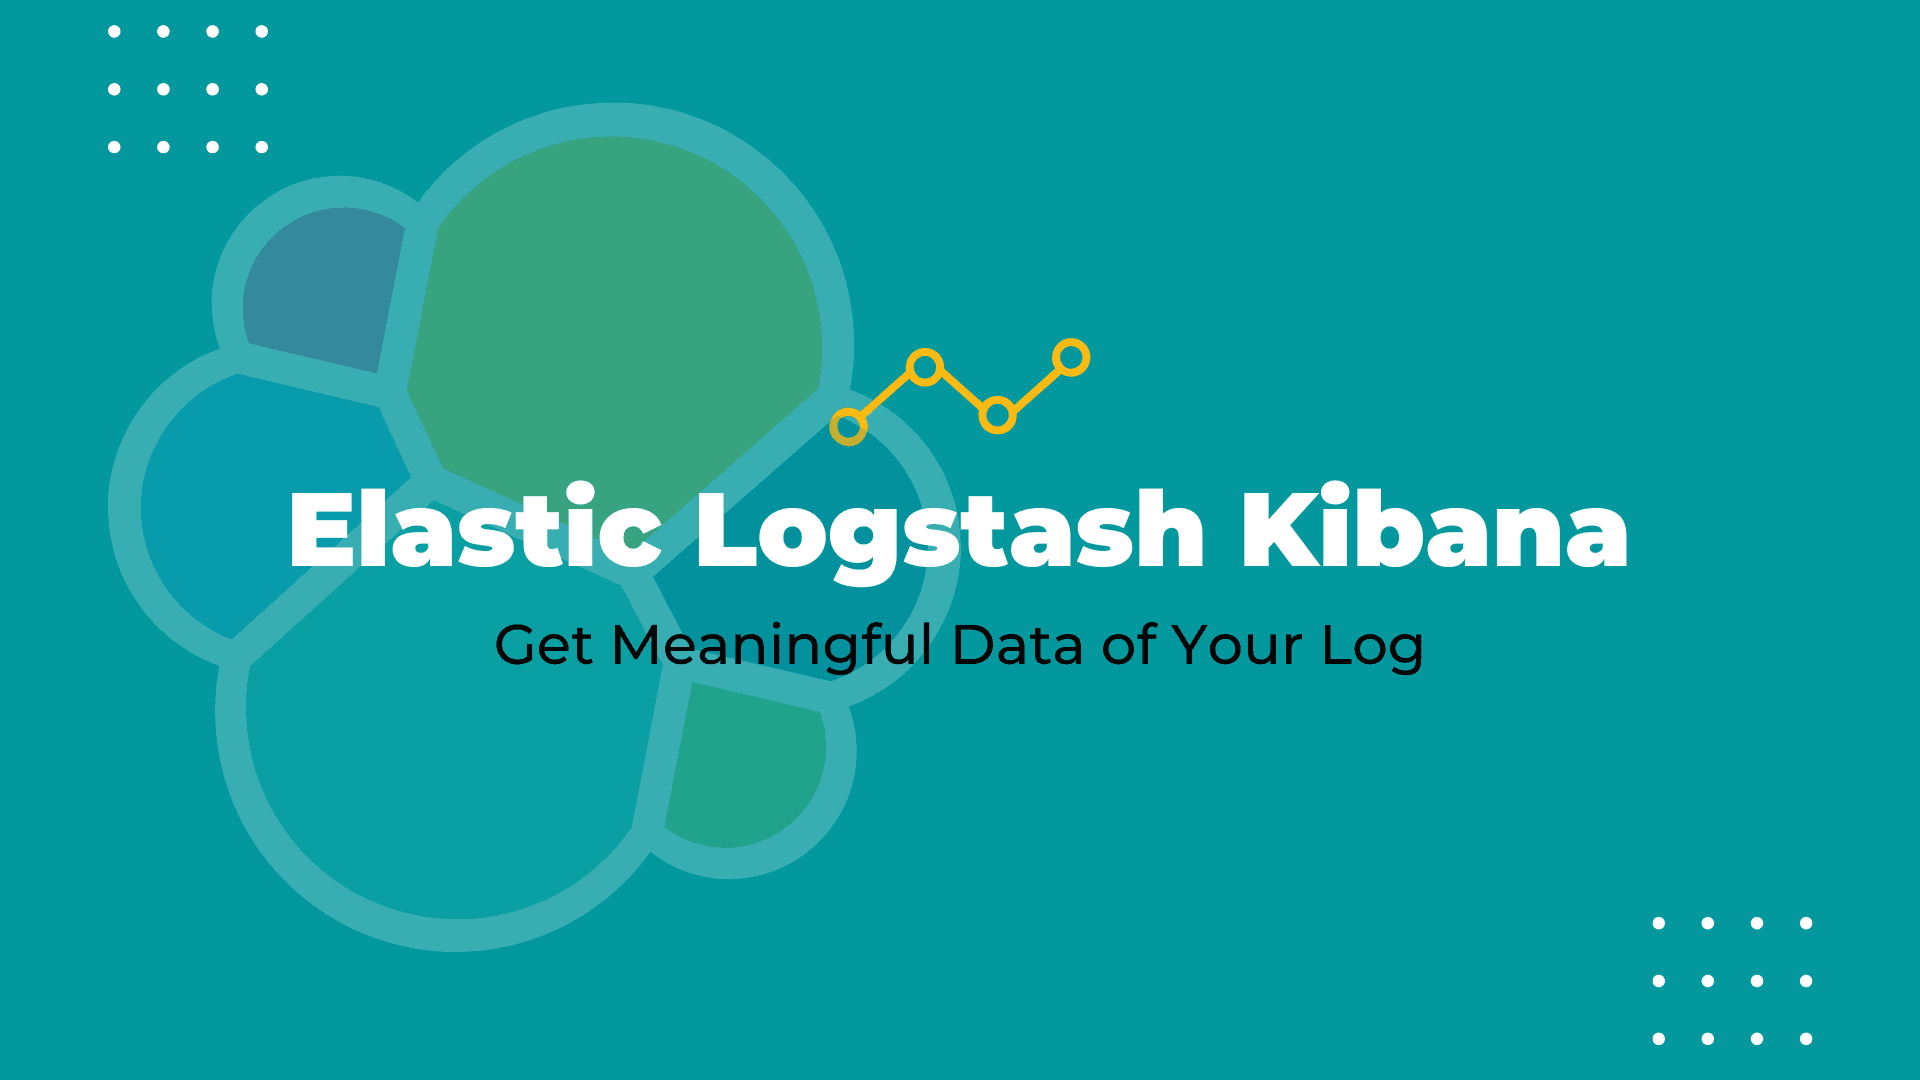 Using ELK to Get Meaningful Data of Your Log image